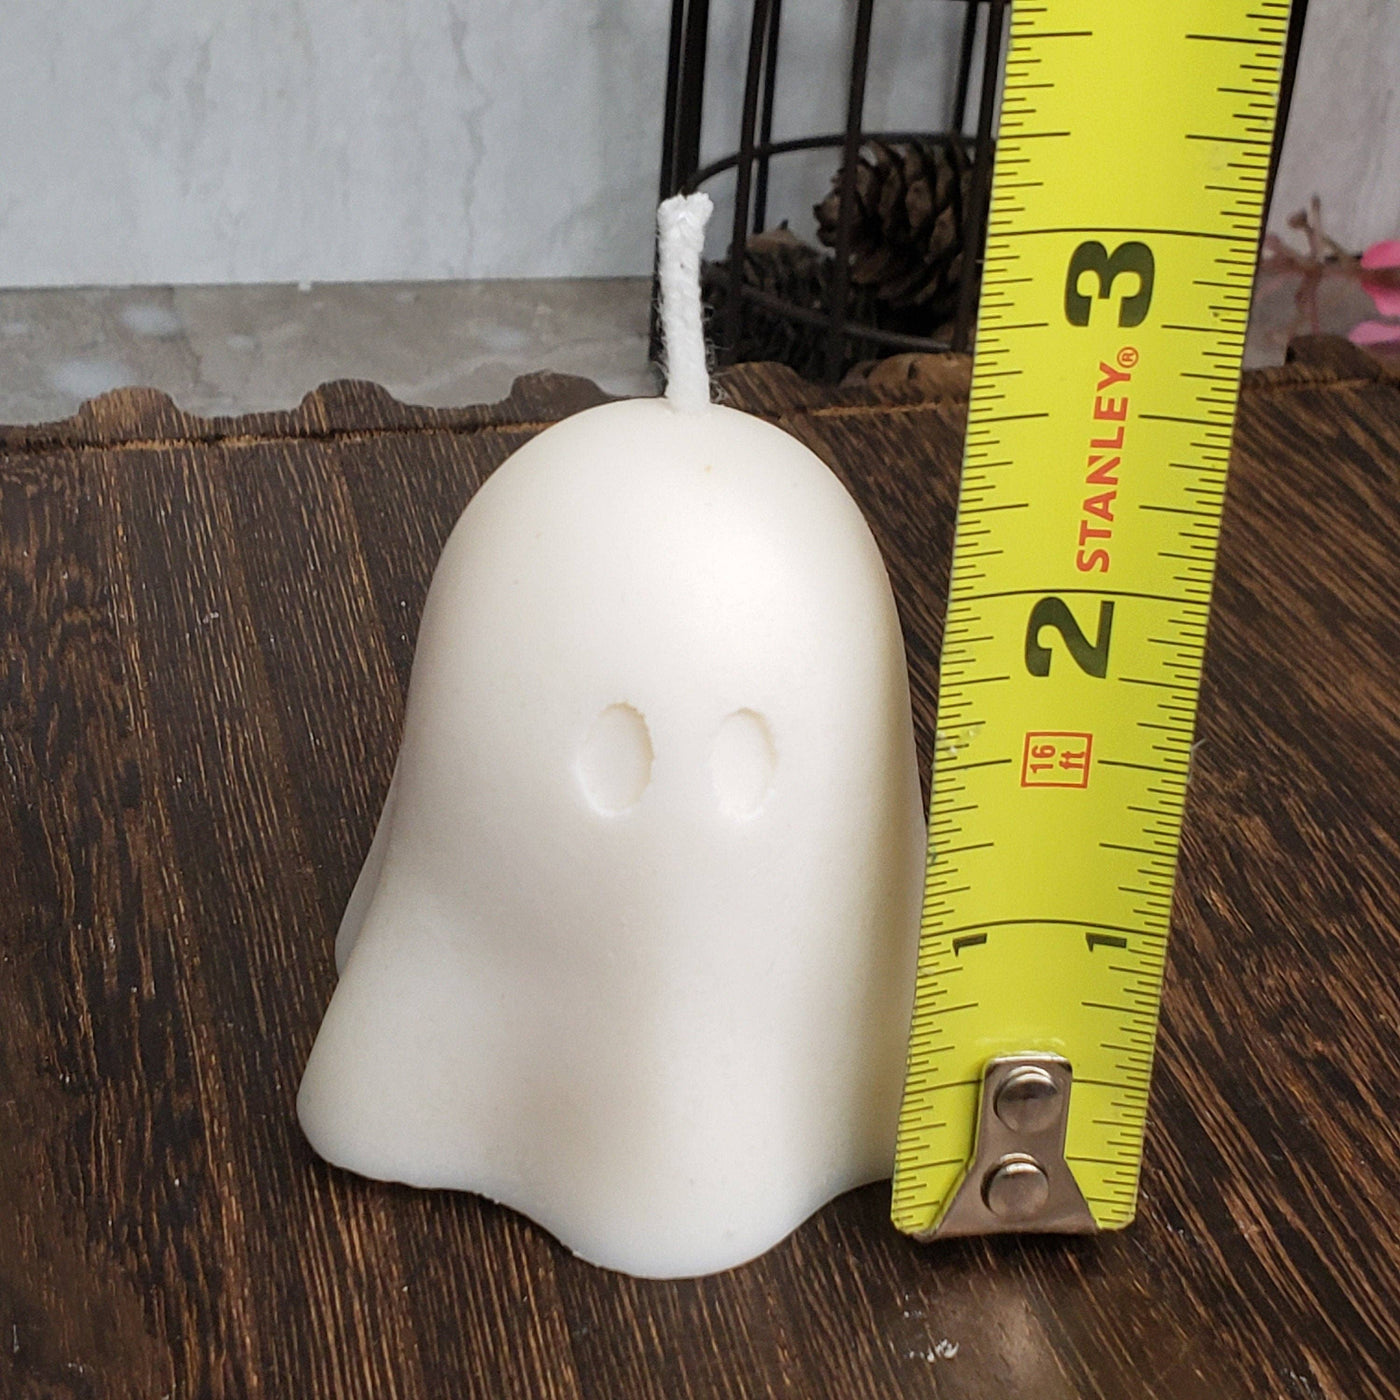 Soy Wax Ghost Candle, Soy Candle, Halloween Candle, Scented: LavenderSageRosmary / White